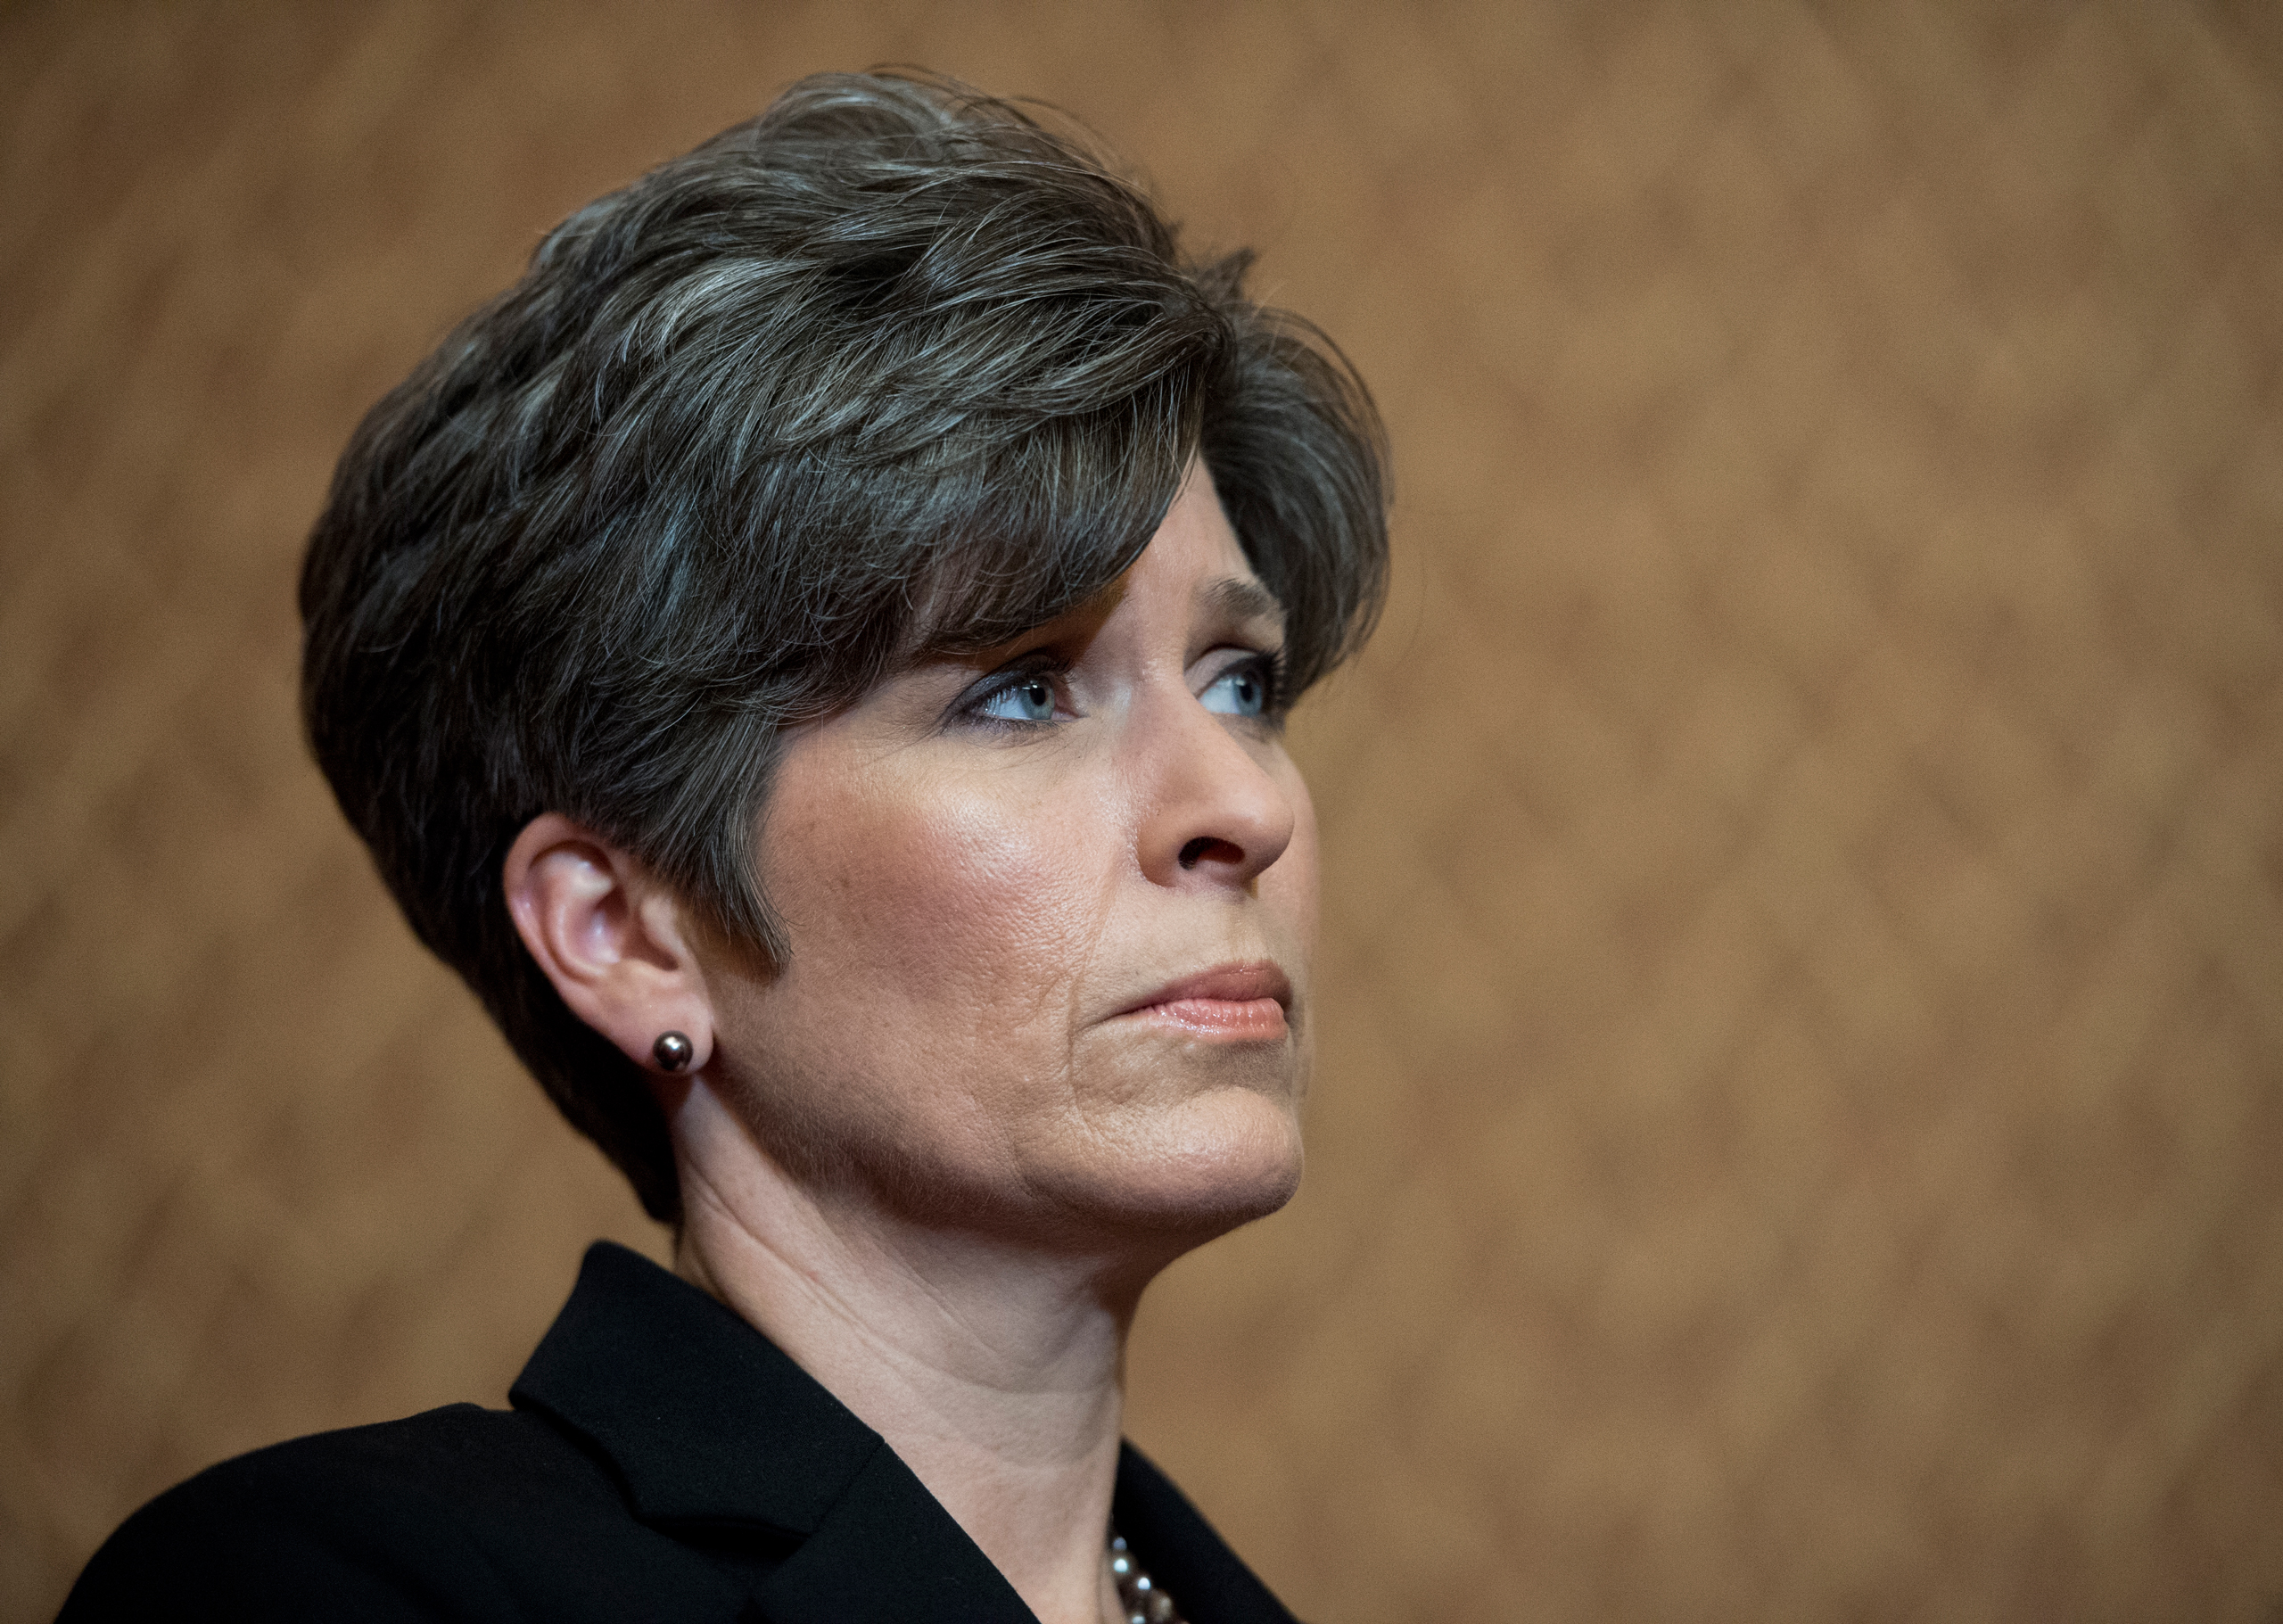 Sen. Joni Ernst participates in the news conference with survivors of sexual assault to urge the Senate to pass the Campus Accountability and Safety Act April 26, 2016. (Bill Clark—AP)